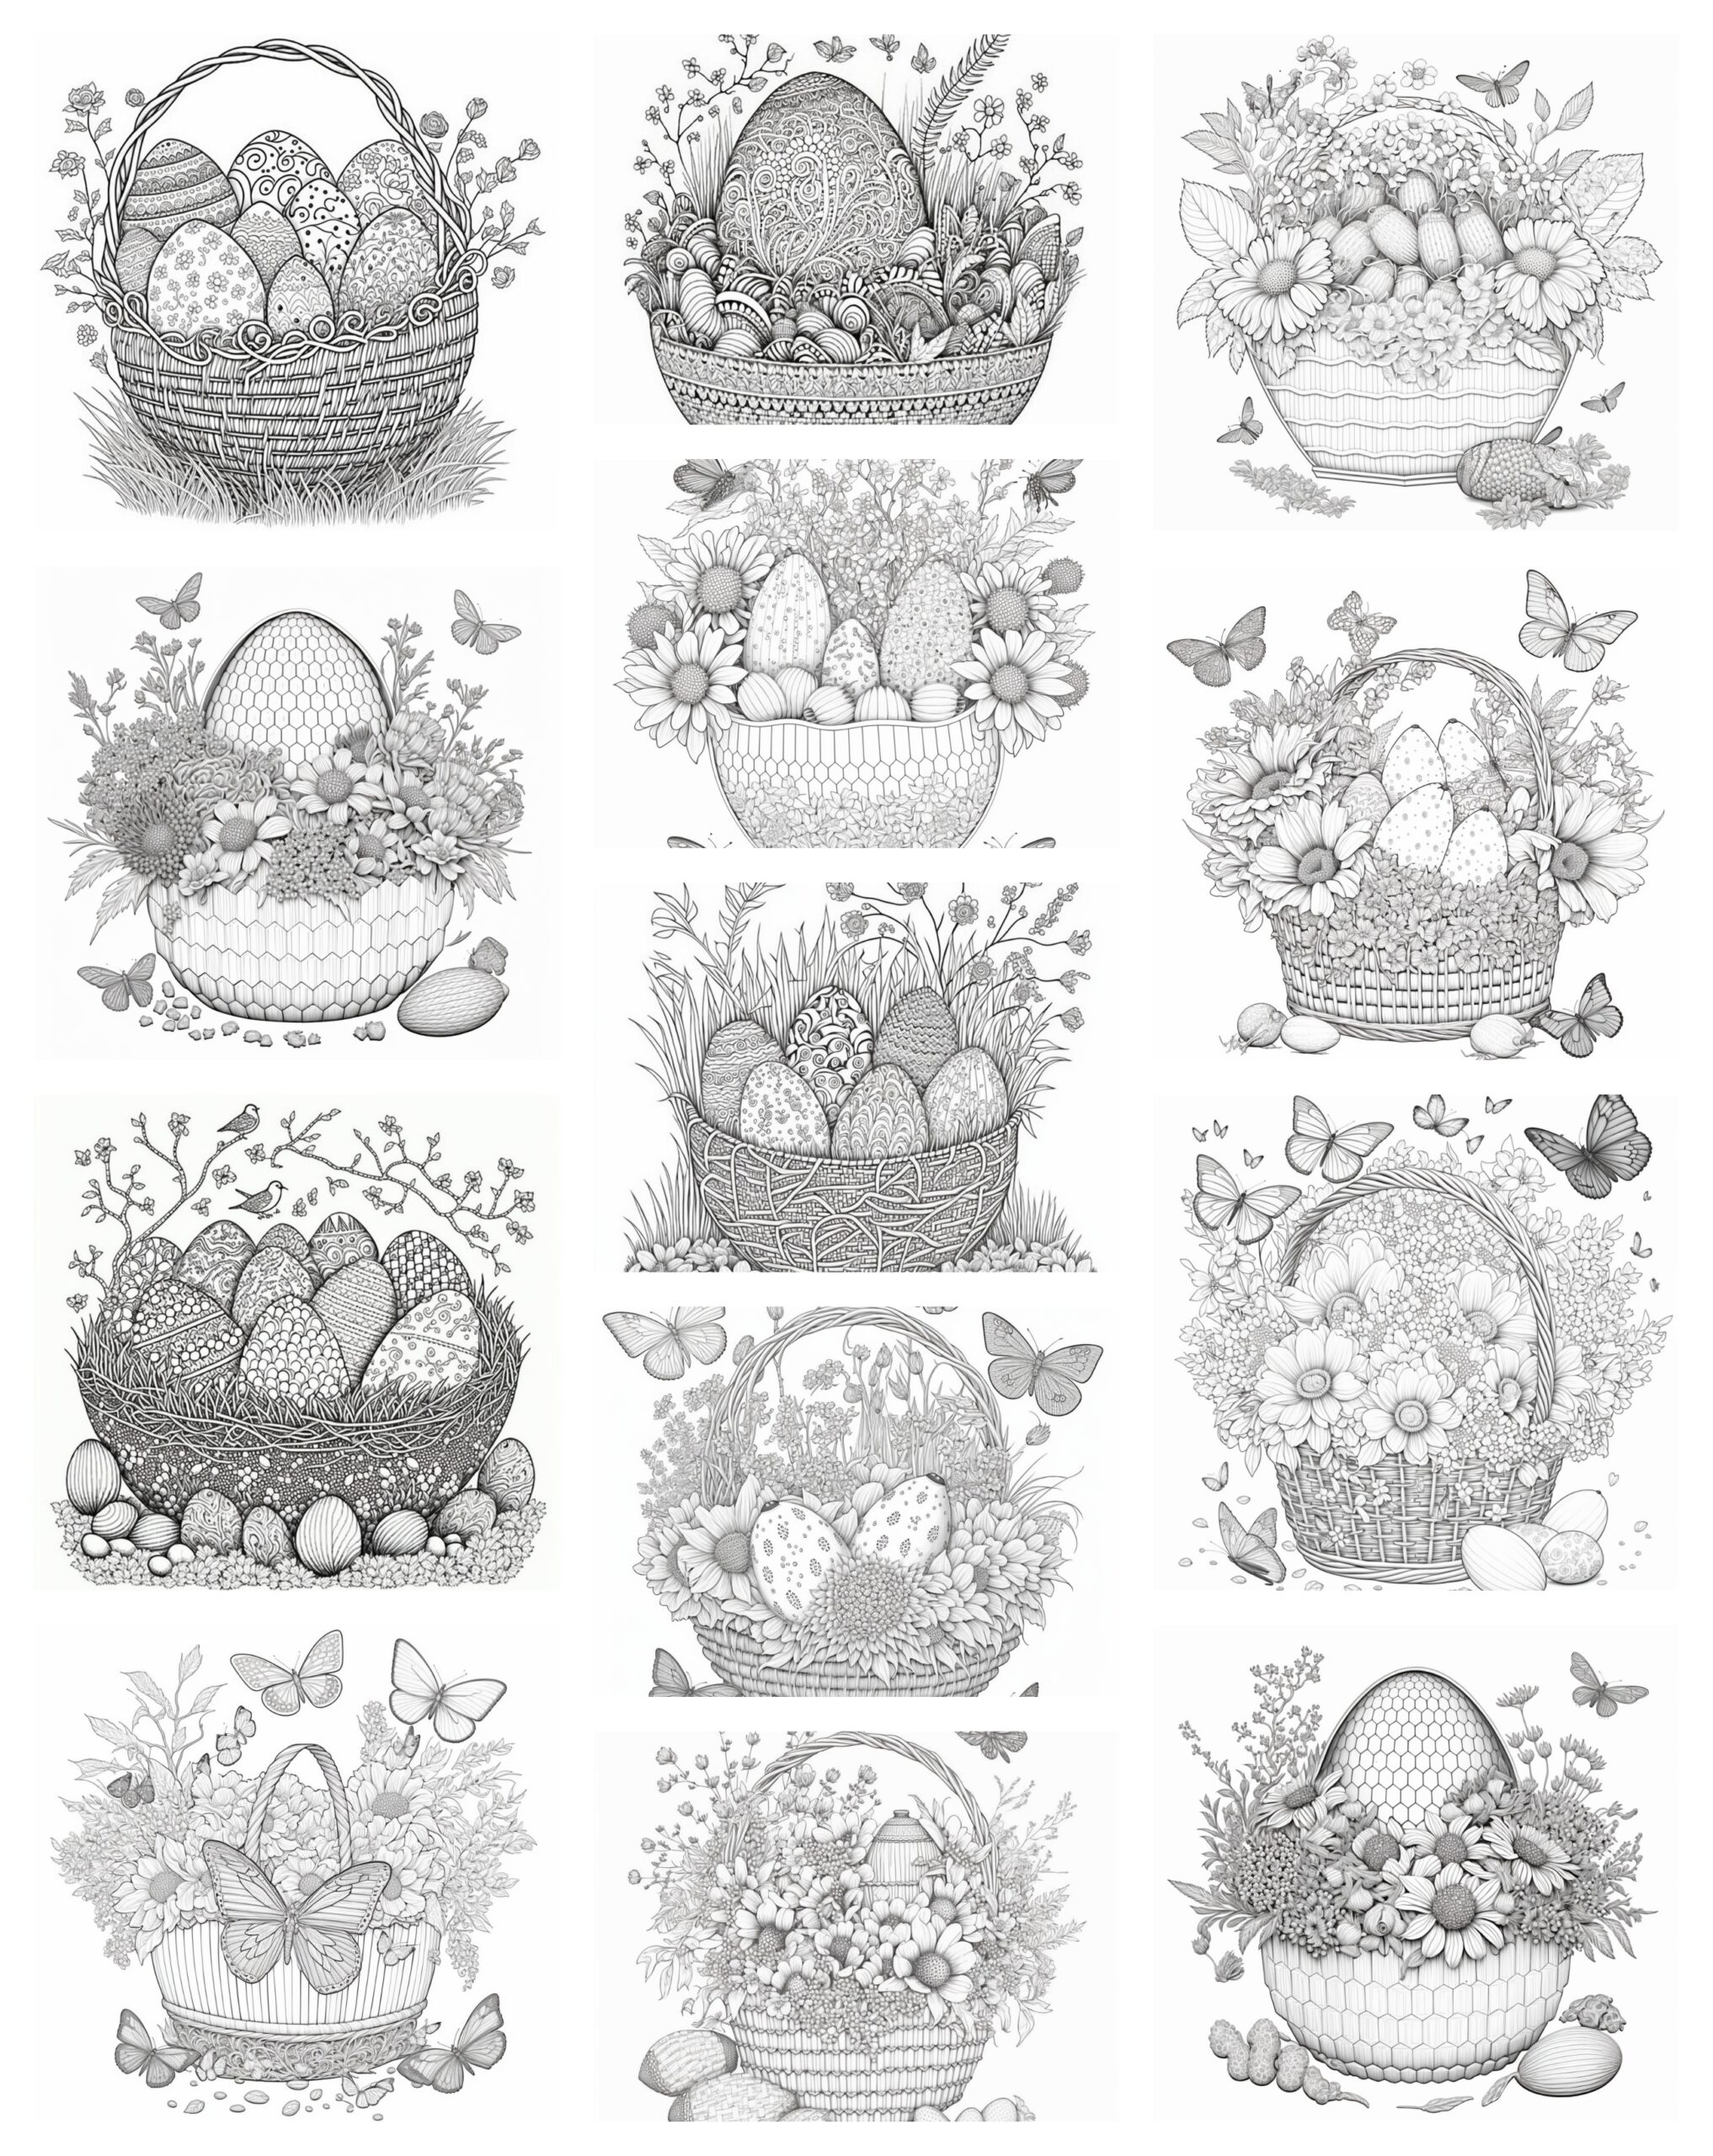 Baskets & Flowers Grayscale Coloring Book 13 pages PDF or printed pages 